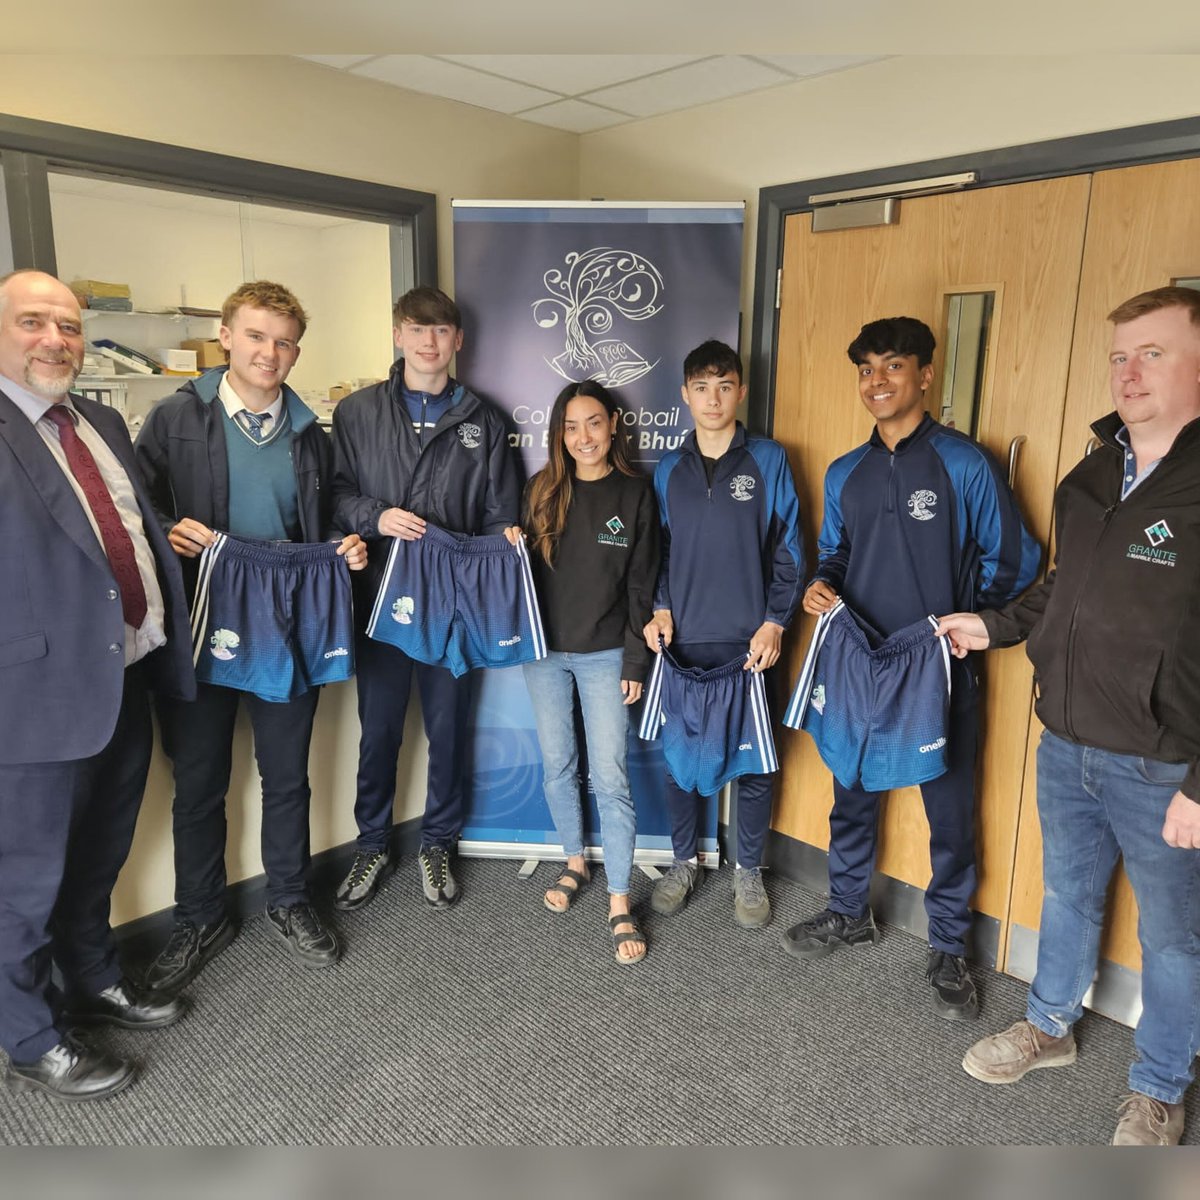 Our Junior GAA Team was presented with shorts & socks sponsored by Laura and Chris from Granite & Marble Crafts. The Junior Boys reached a North Leinster Final this year. Thank you to Granite and Marble Craft for their sponsorship and to Grants Clothing for supplying the gear💙